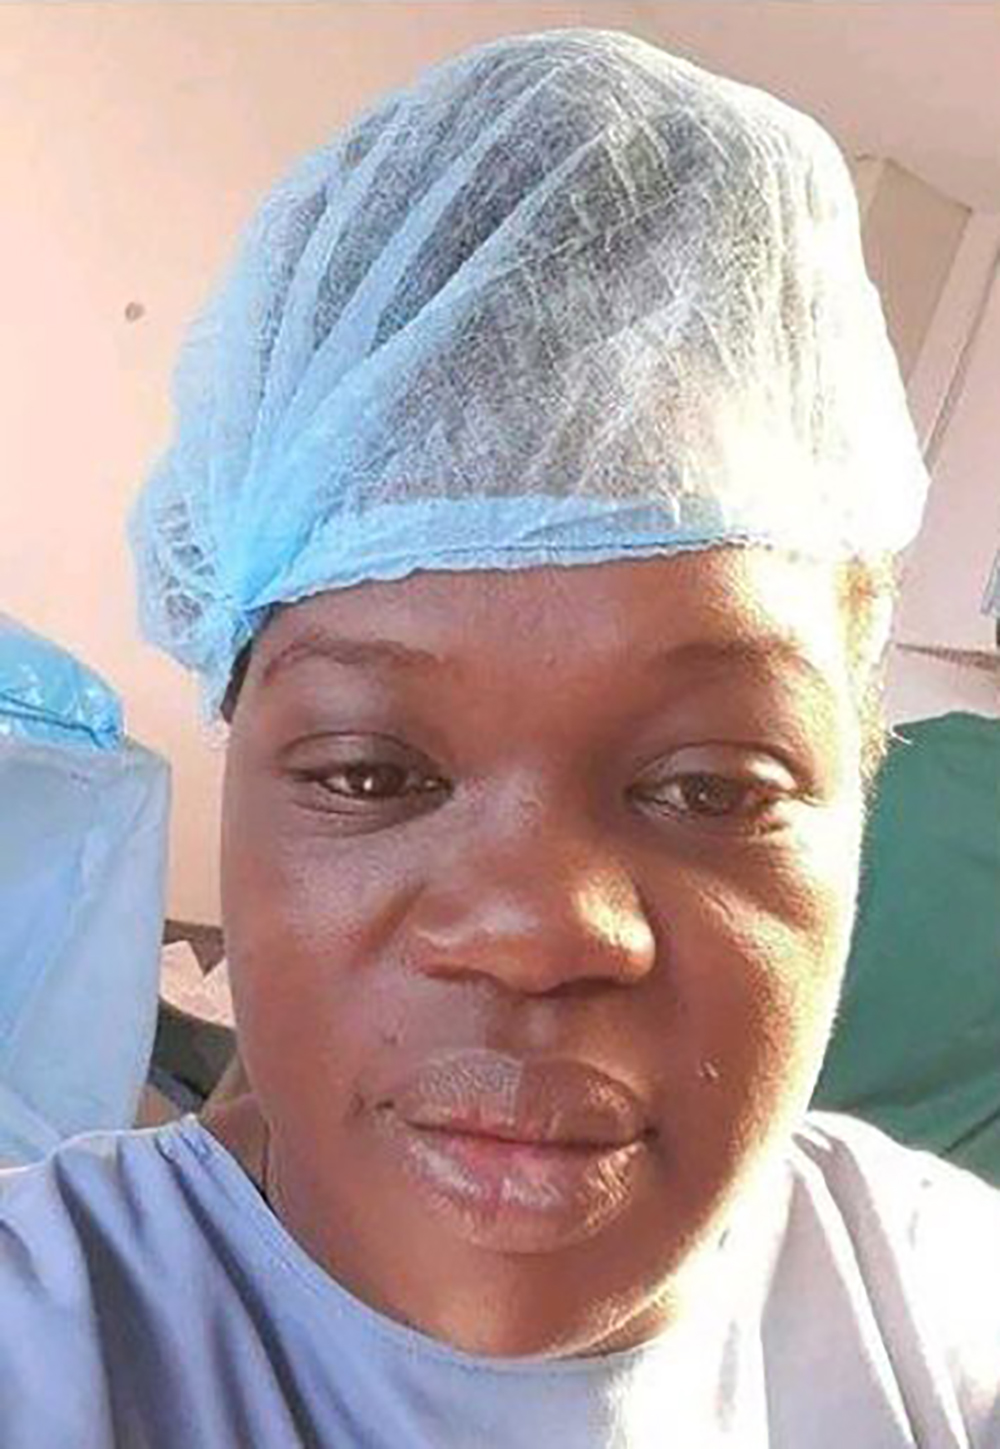 My Husband Died When I was 2 months Pregnant : Lady Pens Emotional Women's Day Message 1